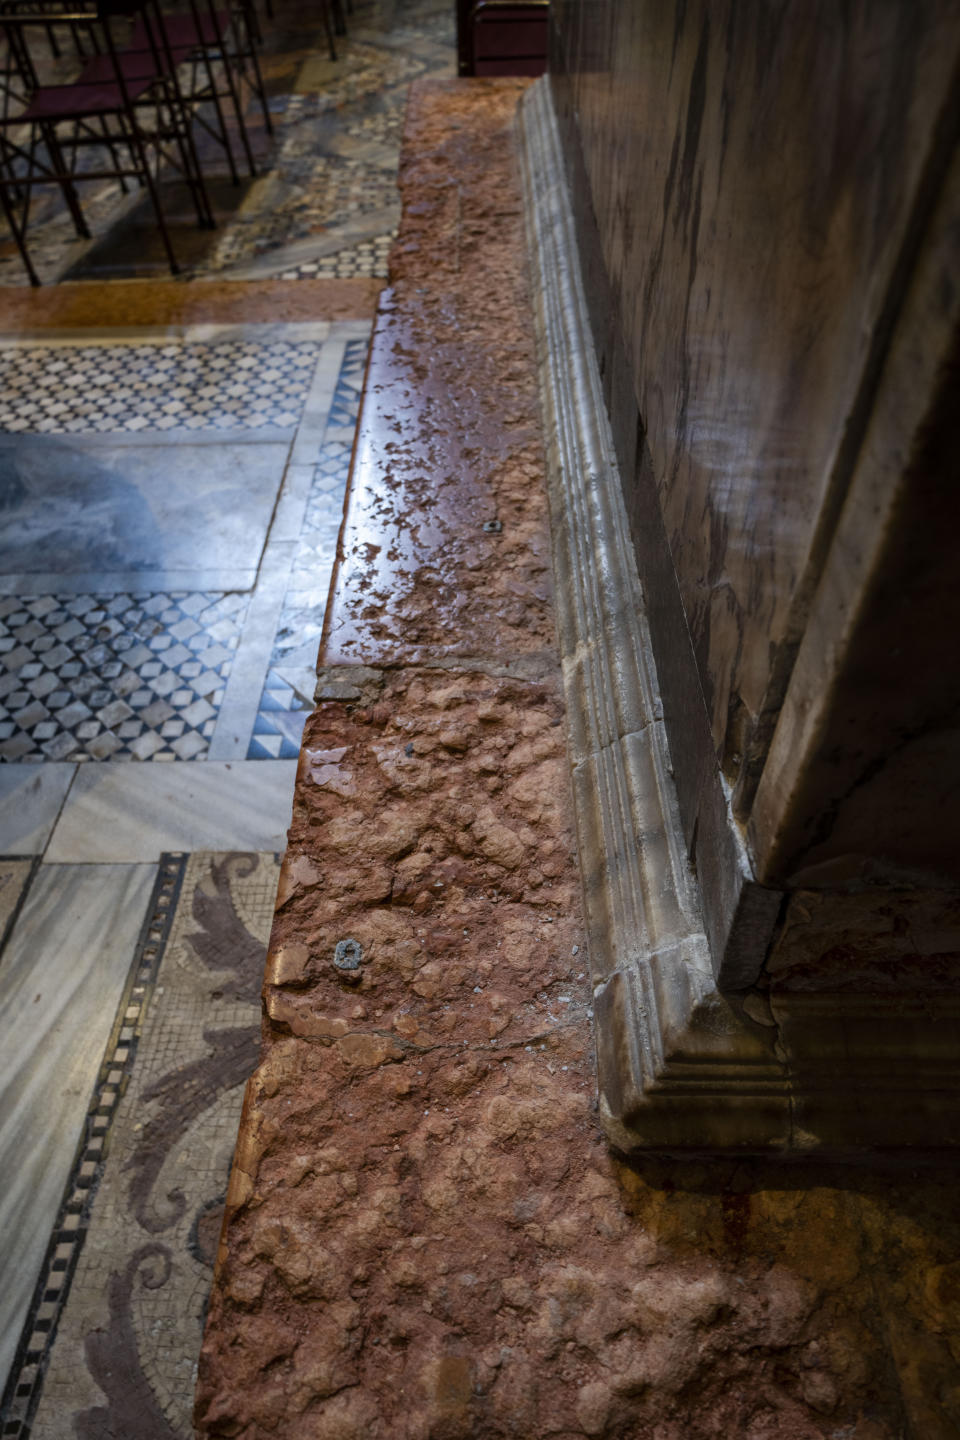 Signs of erosion are visible inside St. Mark's Basilica in Venice, northern Italy, Wednesday, Dec. 7, 2022. Glass barriers that prevent seawater from flooding the 900-year-old Venice's iconic Basilica during high tides have been recently installed. St. Mark's Square is the lowest-laying city area and frequently ends up underwater during extreme weather. (AP Photo/Domenico Stinellis)